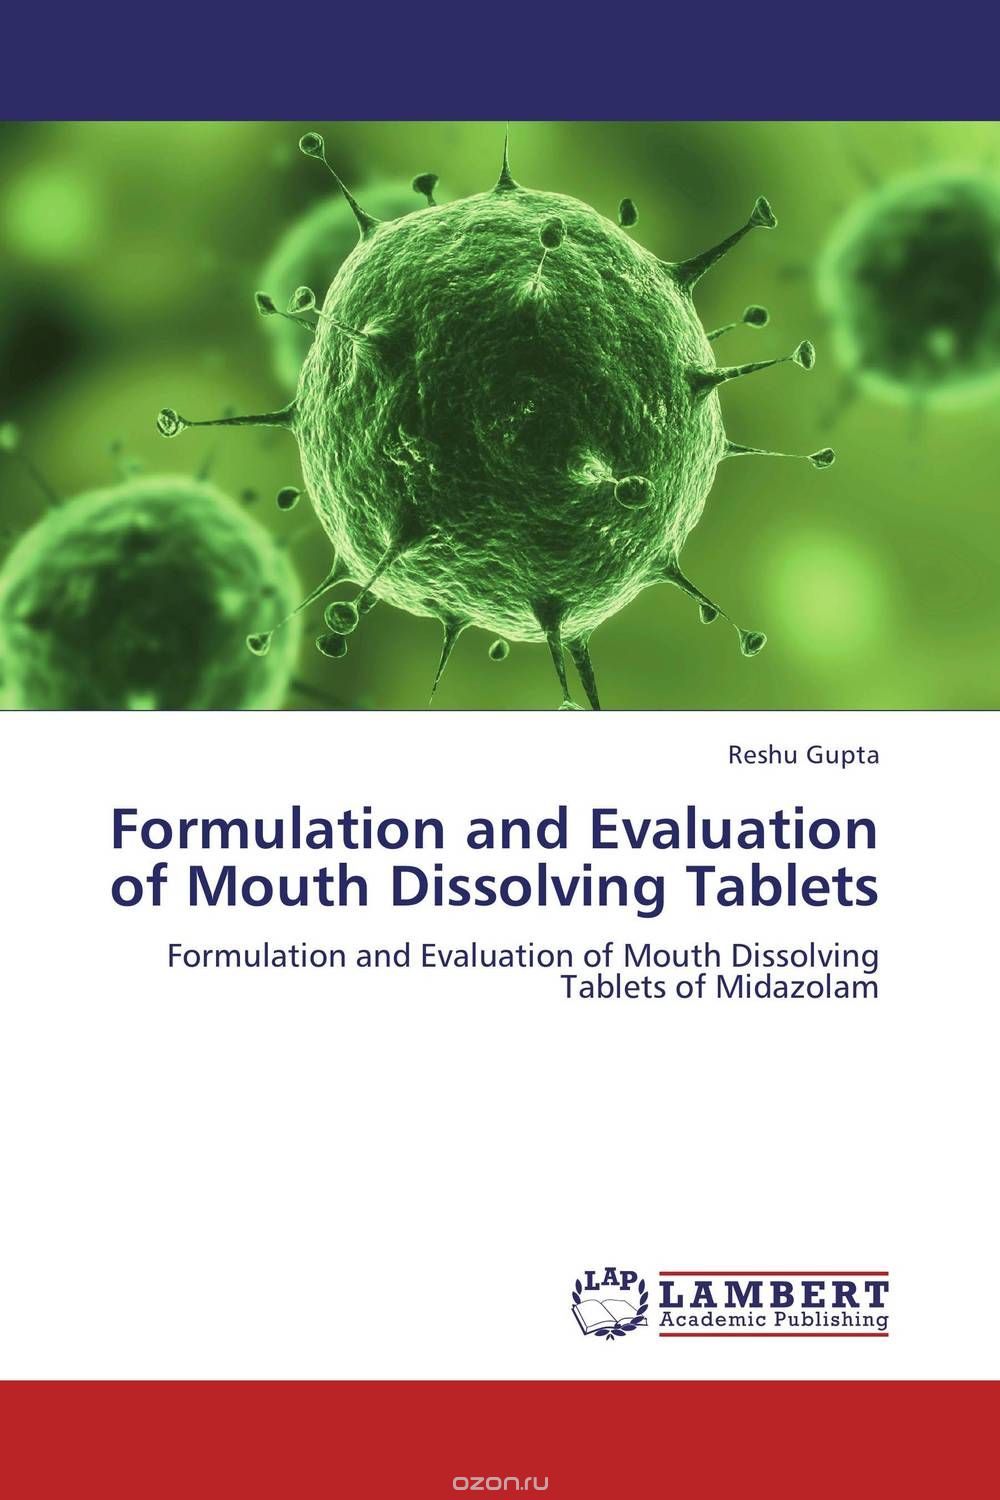 Formulation and Evaluation of Mouth Dissolving Tablets